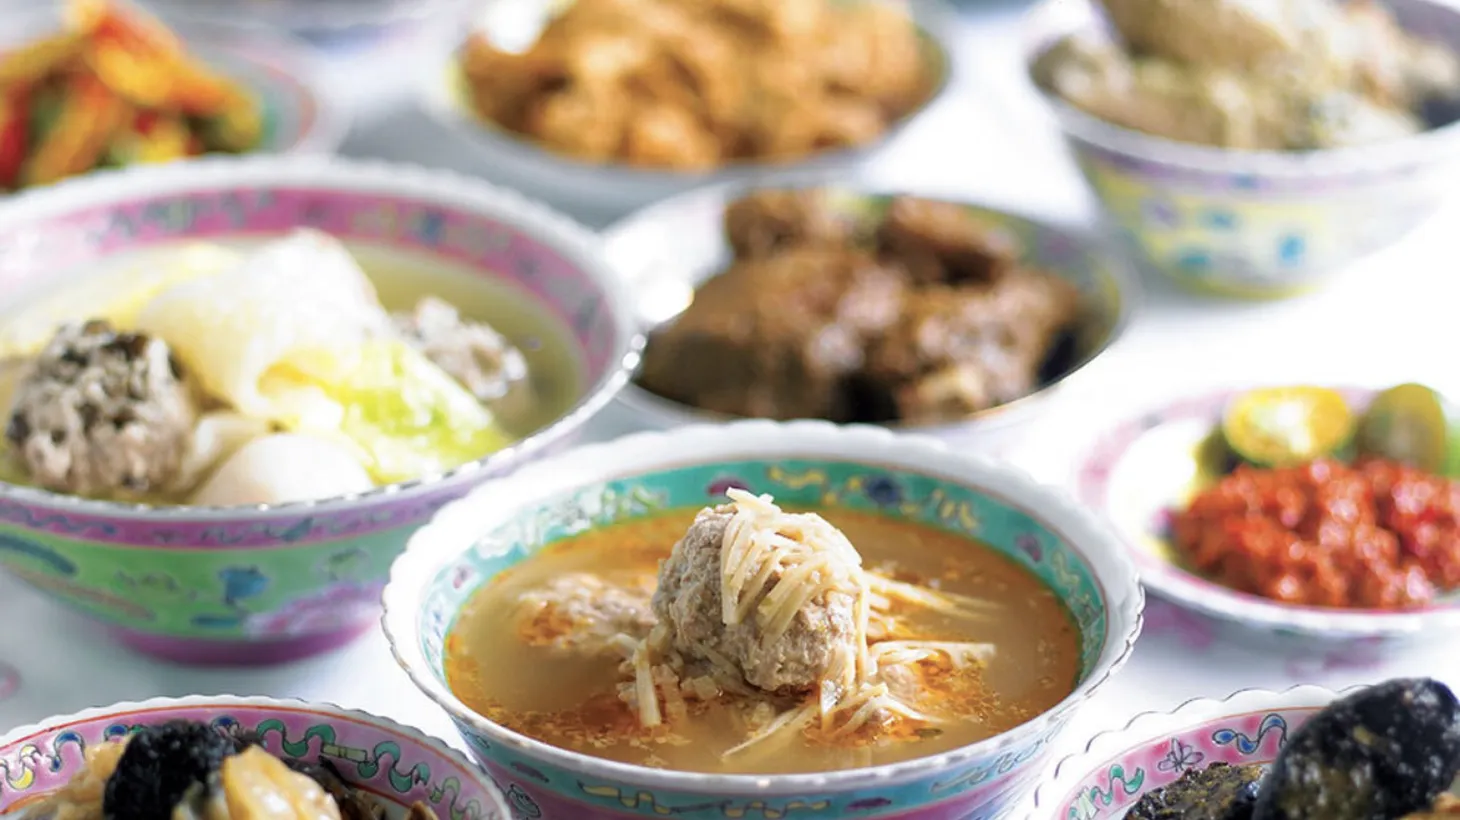 Sharon Wee attempts to replicate all of the dishes her mother prepared for Lunar New Year including chap chai (vegetable stew with sliced pork and shrimp), sambal timun (cucumber salad in fresh chile paste and gizzards), hee pio (fishballs, meatballs, fish maw and cabbage soup), and pong tauhu (pork and shrimp meatballs soup with bamboo shoots.